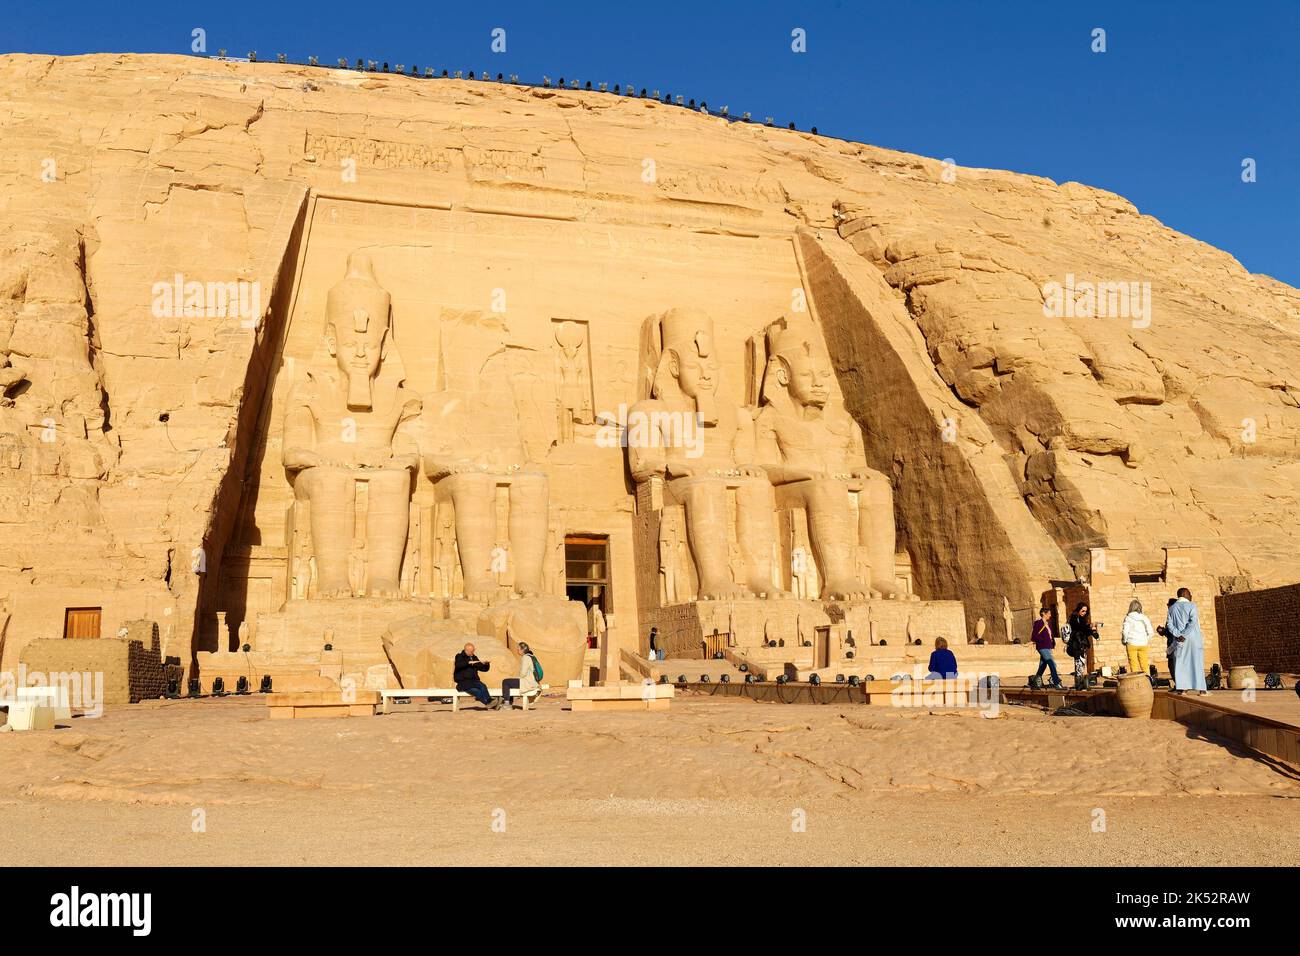 Egypt, Upper Egypt, Nubia, Abu Simbel, listed as World Heritage by UNESCO, the Great Temple known as Rameses II temple Stock Photo